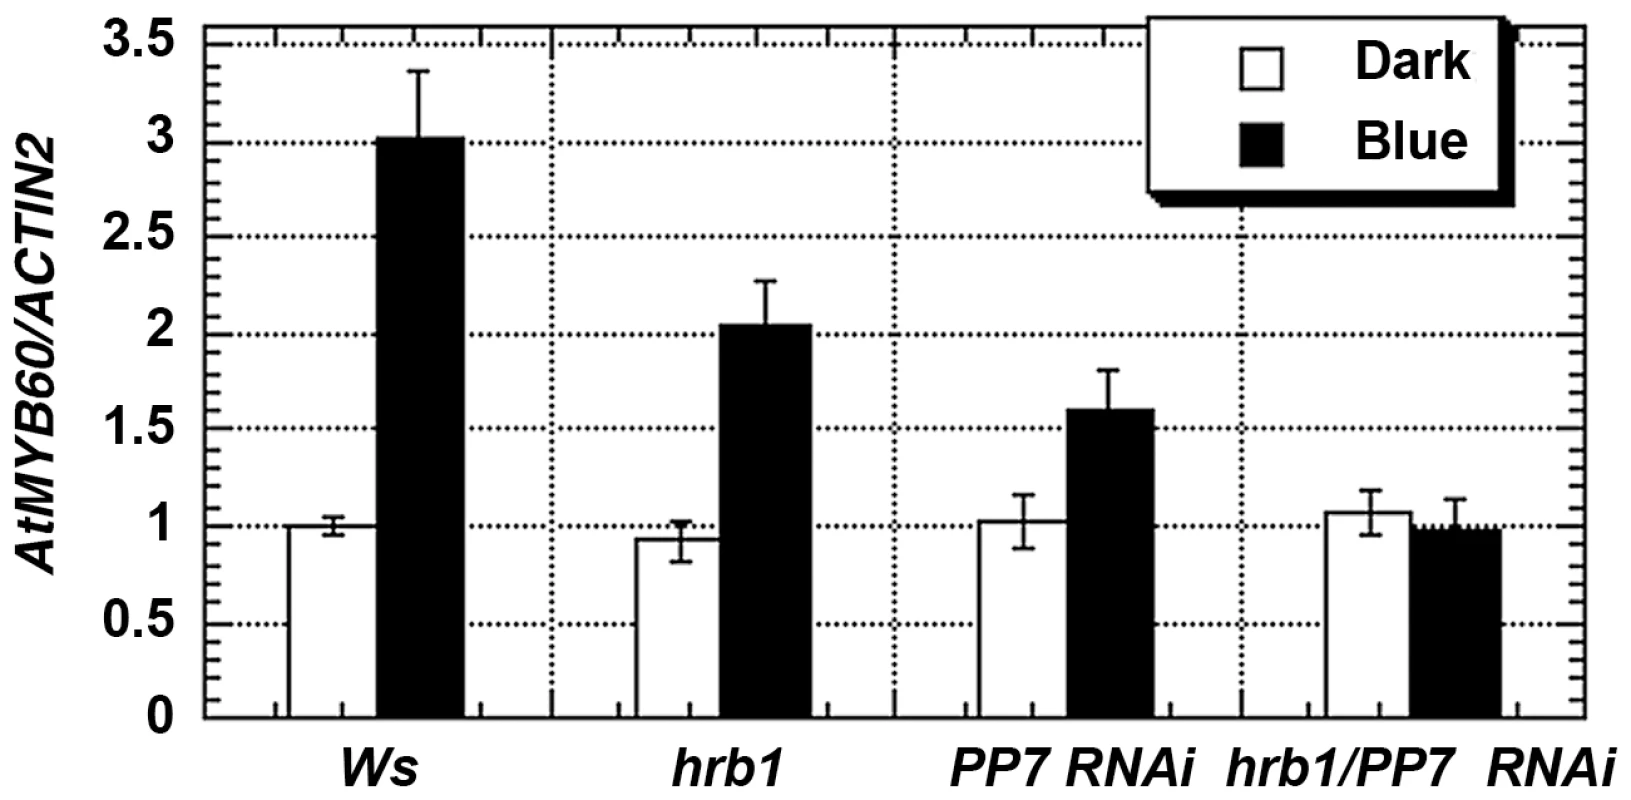 HRB1 and PP7 regulate the expression of <i>MYB60</i>.